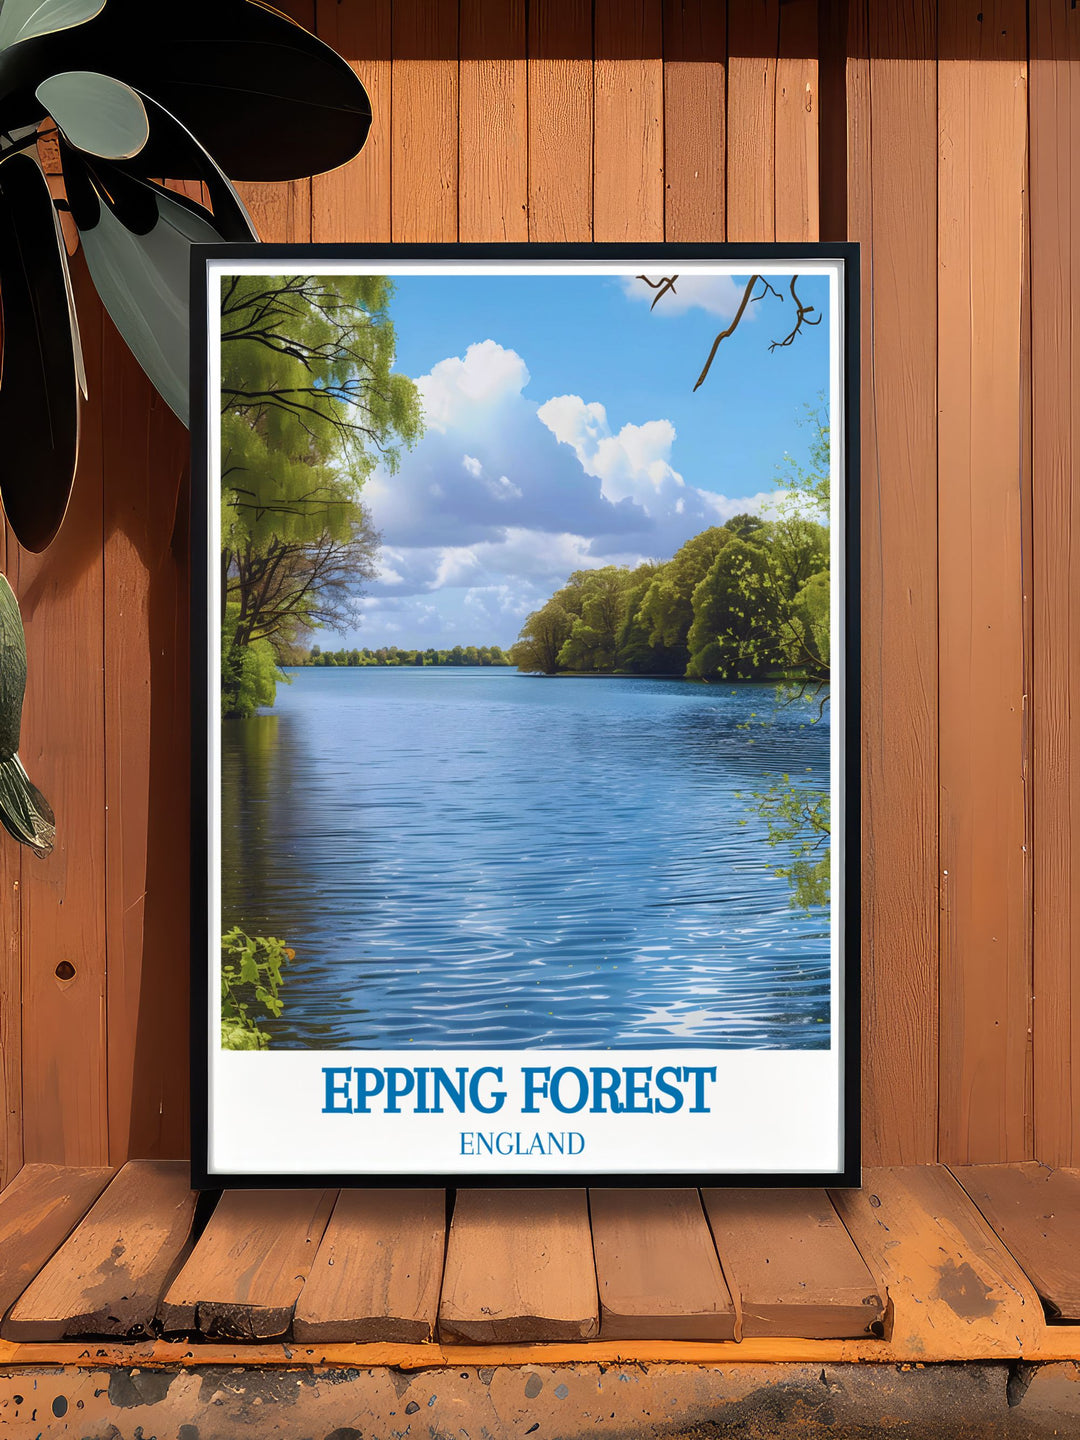 Modern wall decor highlighting the picturesque views of Connaught Water, capturing the natural tranquility of Epping Forest.